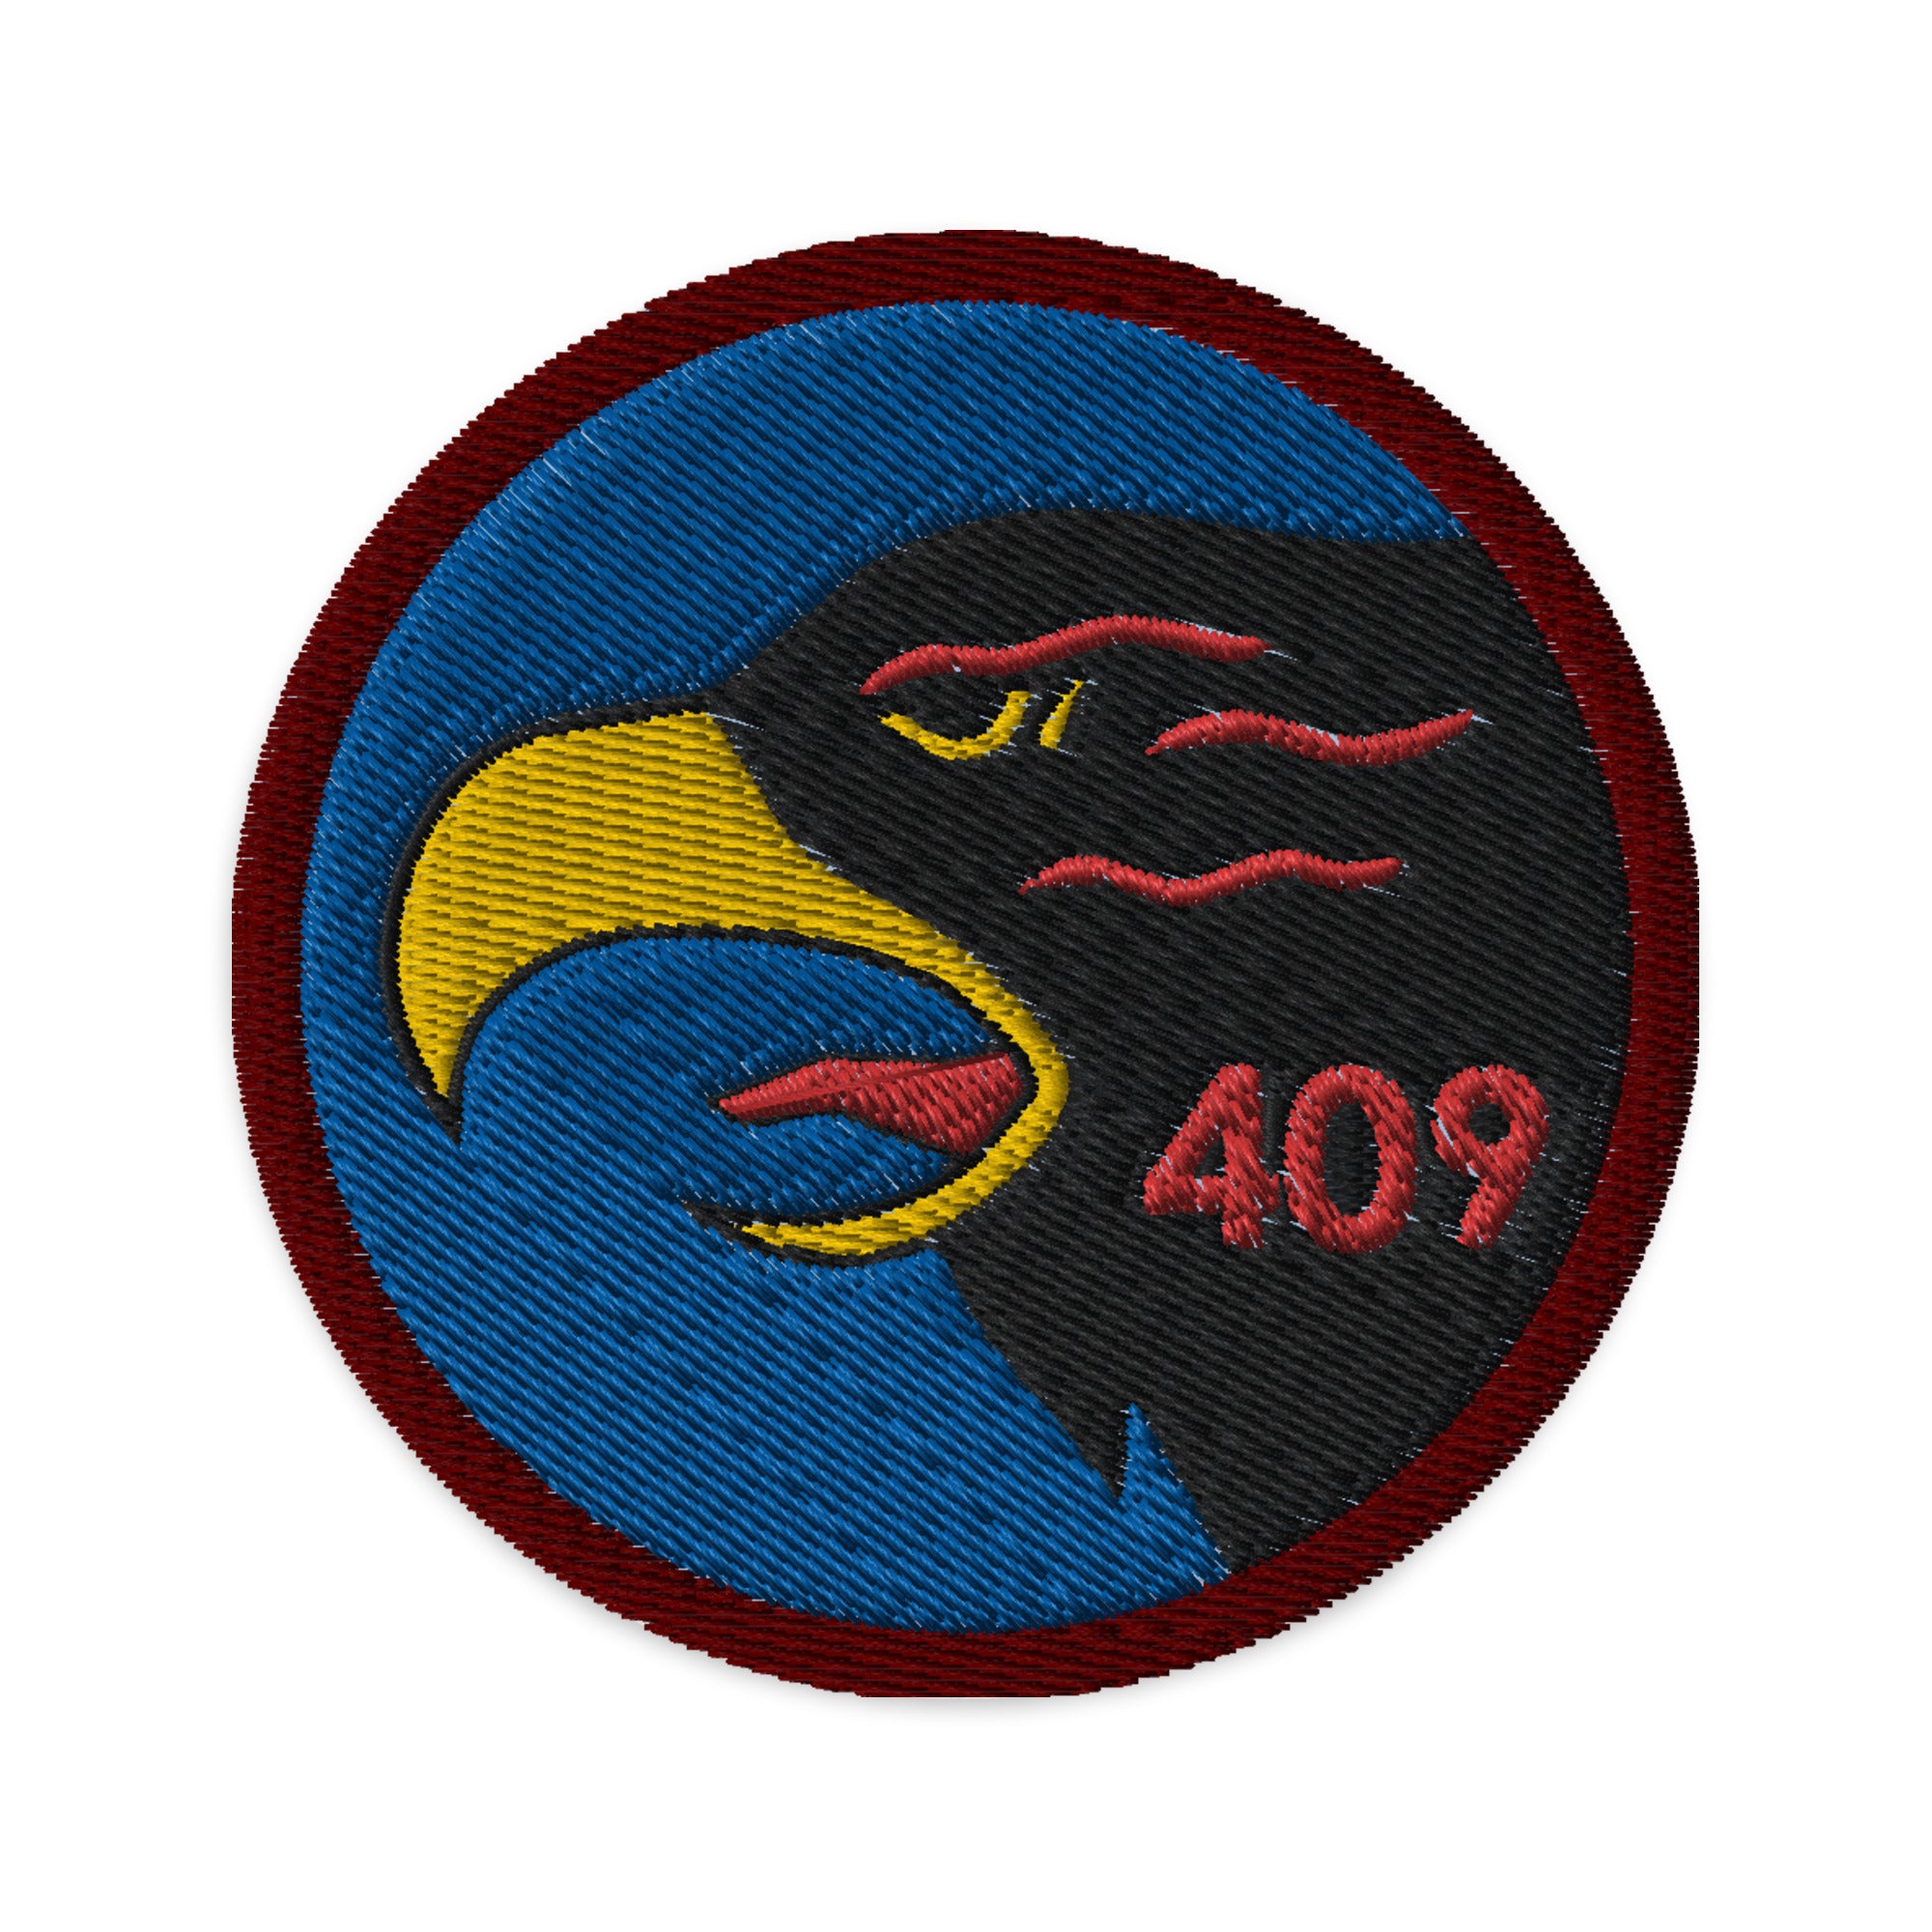 409 SQN RCAF Embroidered patches - I Love a Hangar